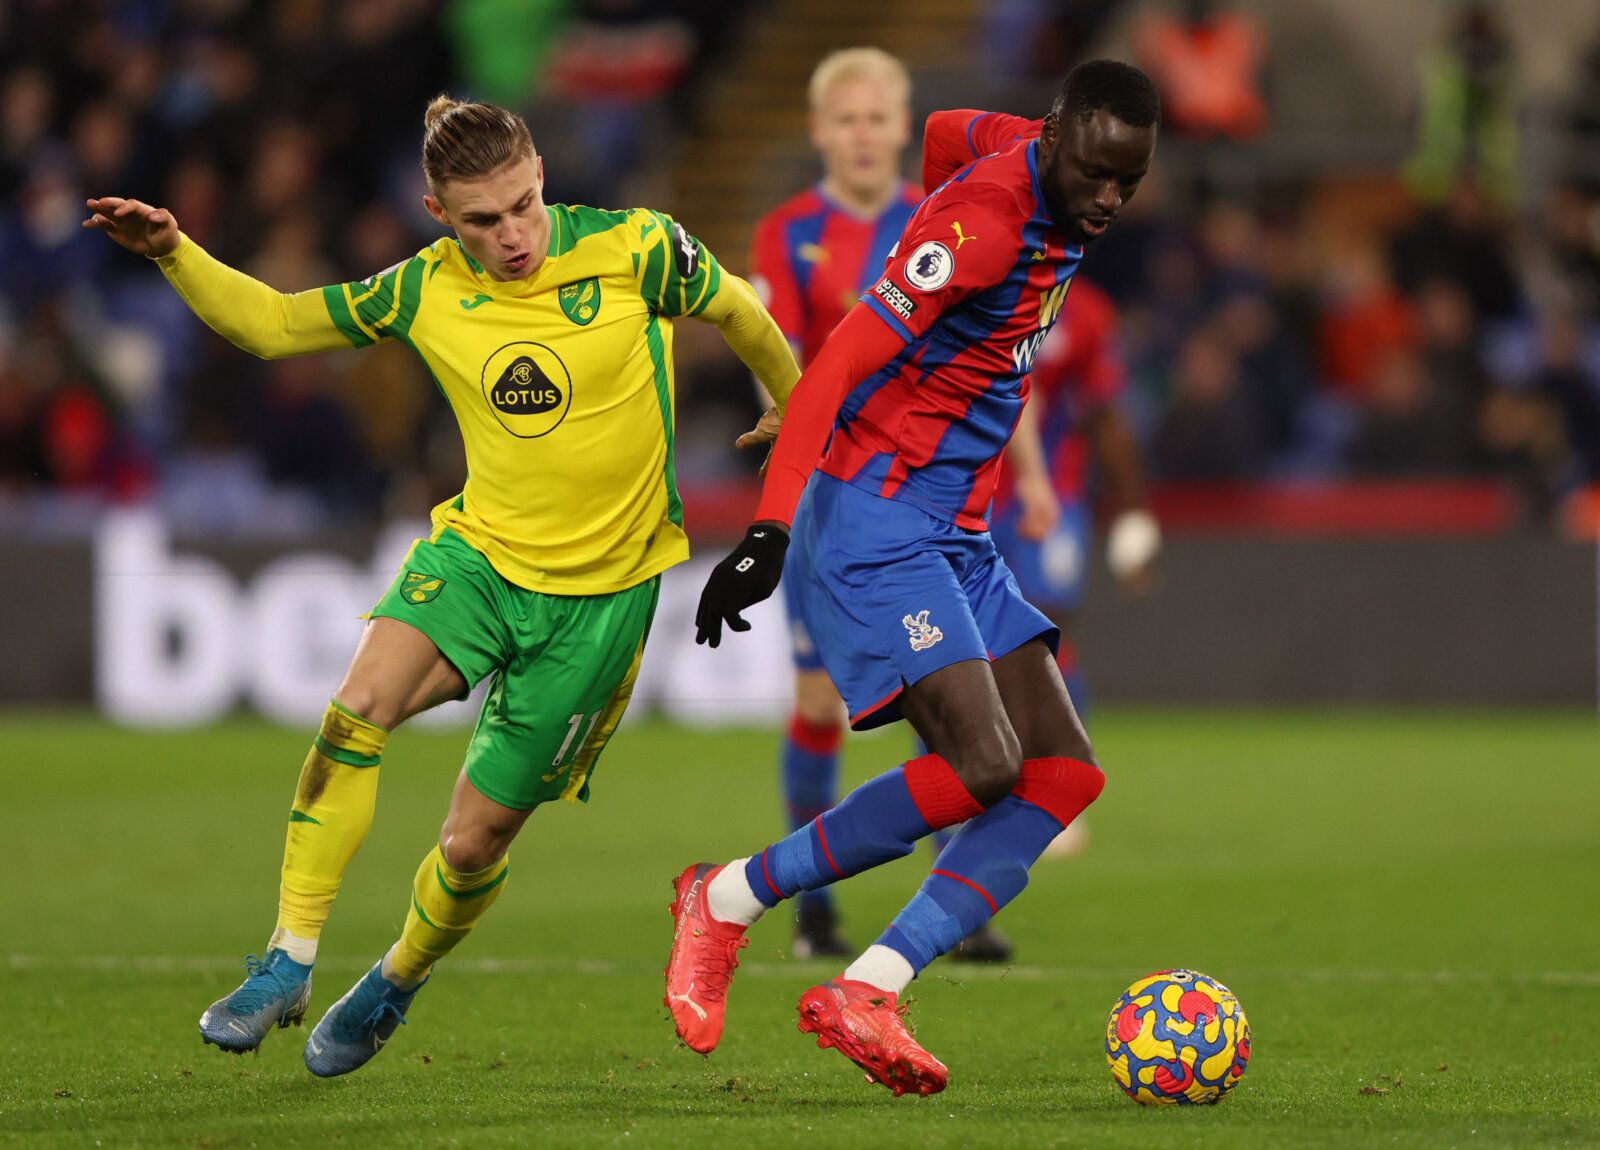 Soccer Football - Premier League - Crystal Palace v Norwich City - Selhurst Park, London, Britain - December 28, 2021 Crystal Palace's Cheikhou Kouyate in action with Norwich City's Przemyslaw Placheta REUTERS/Ian Walton EDITORIAL USE ONLY. No use with unauthorized audio, video, data, fixture lists, club/league logos or 'live' services. Online in-match use limited to 75 images, no video emulation. No use in betting, games or single club /league/player publications.  Please contact your account r